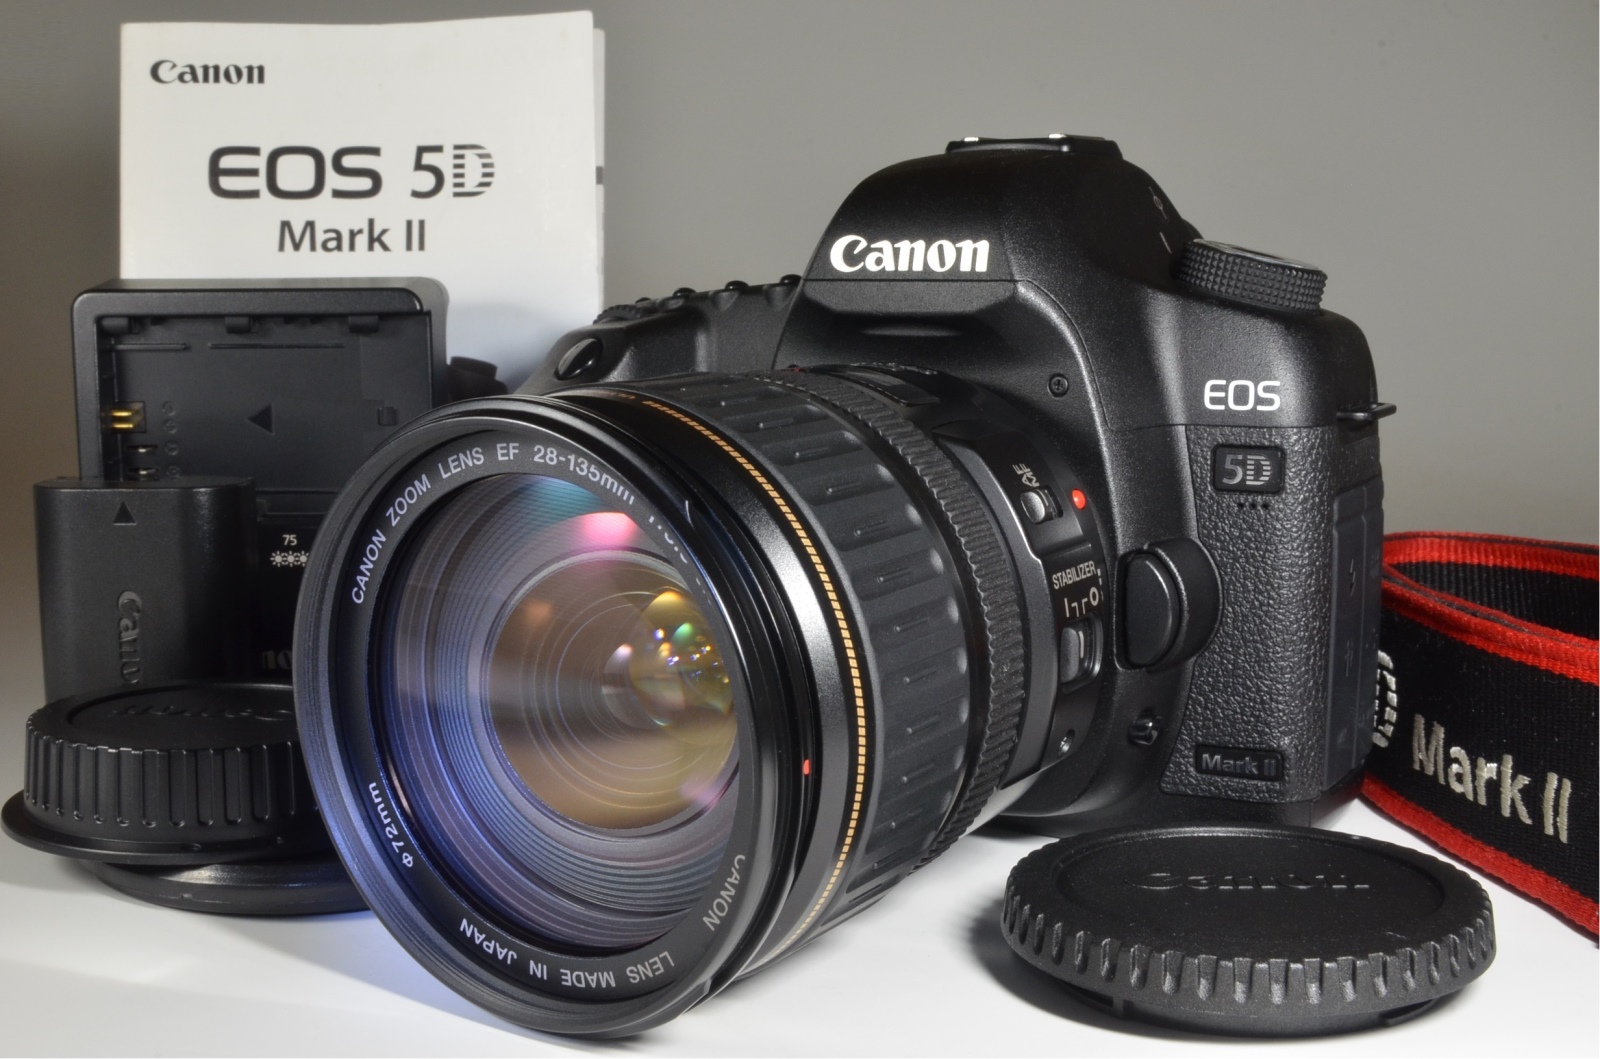 Canon Eos 5d Mark Ii With Ef 28 135mm F3 5 5 6 Is Usm A0337 Superb Japan Camera